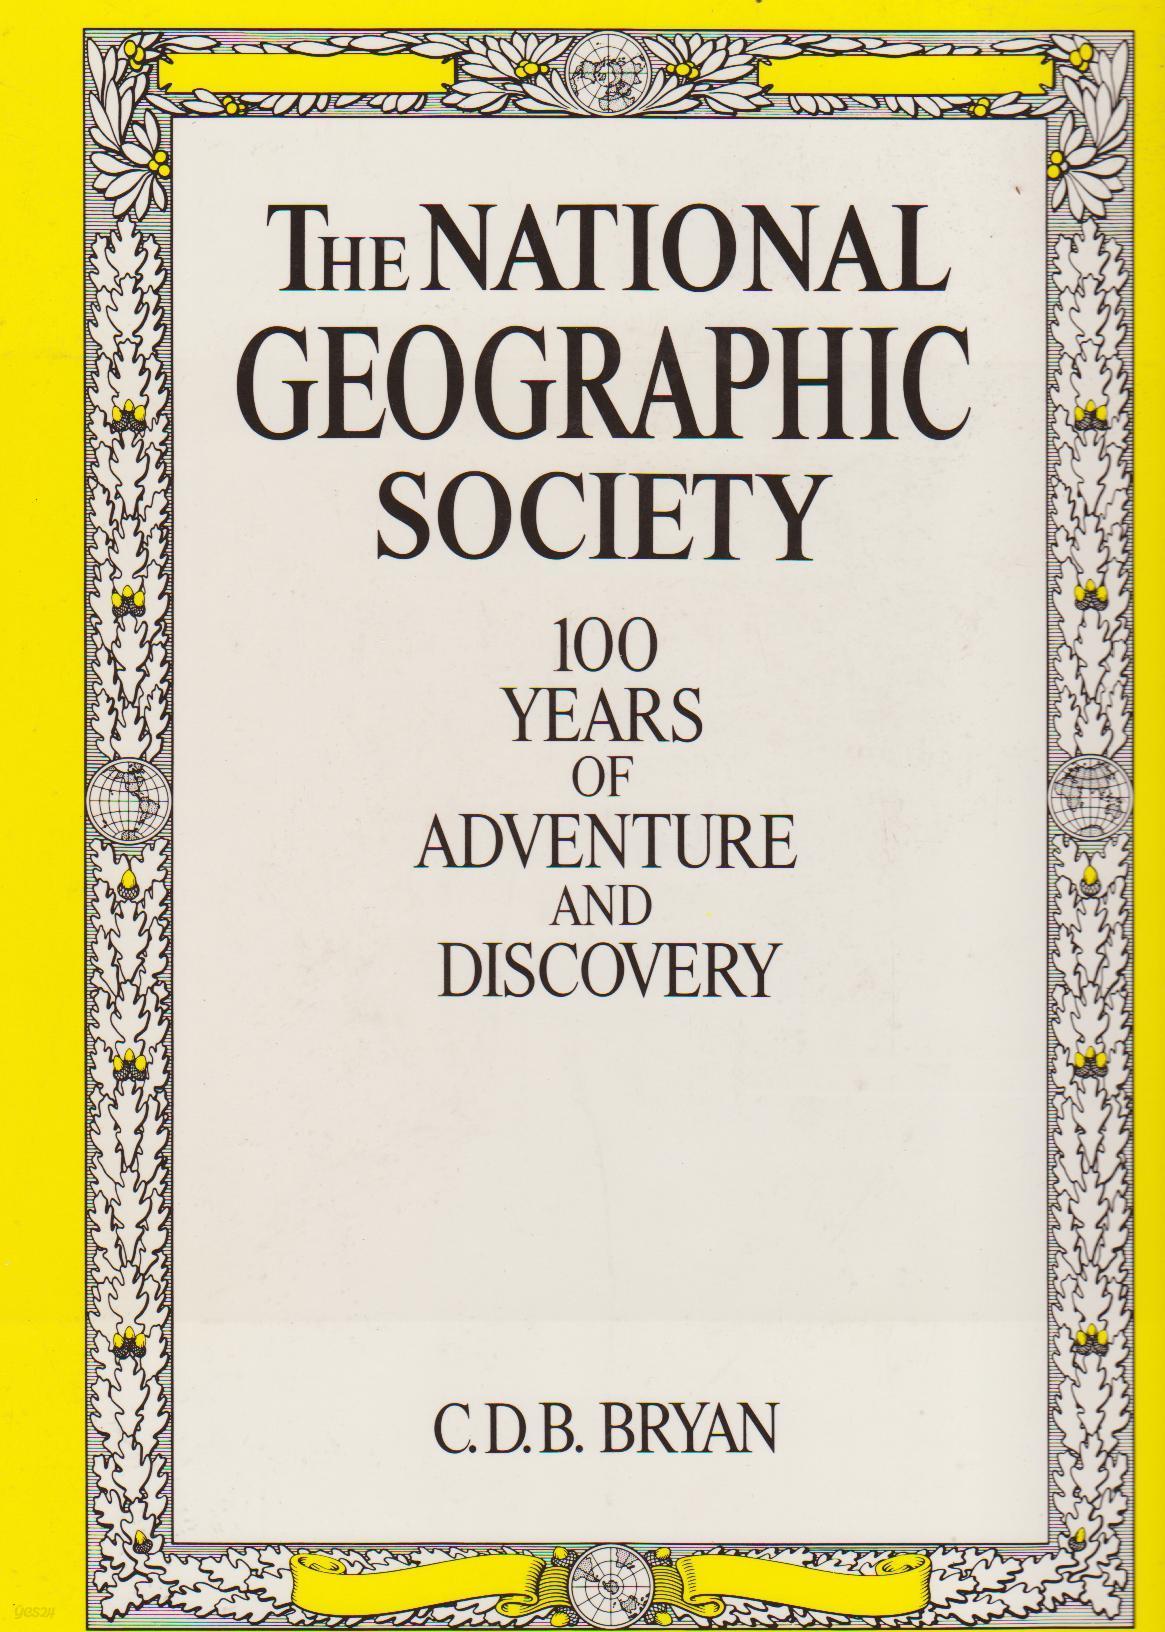 The National Geographic